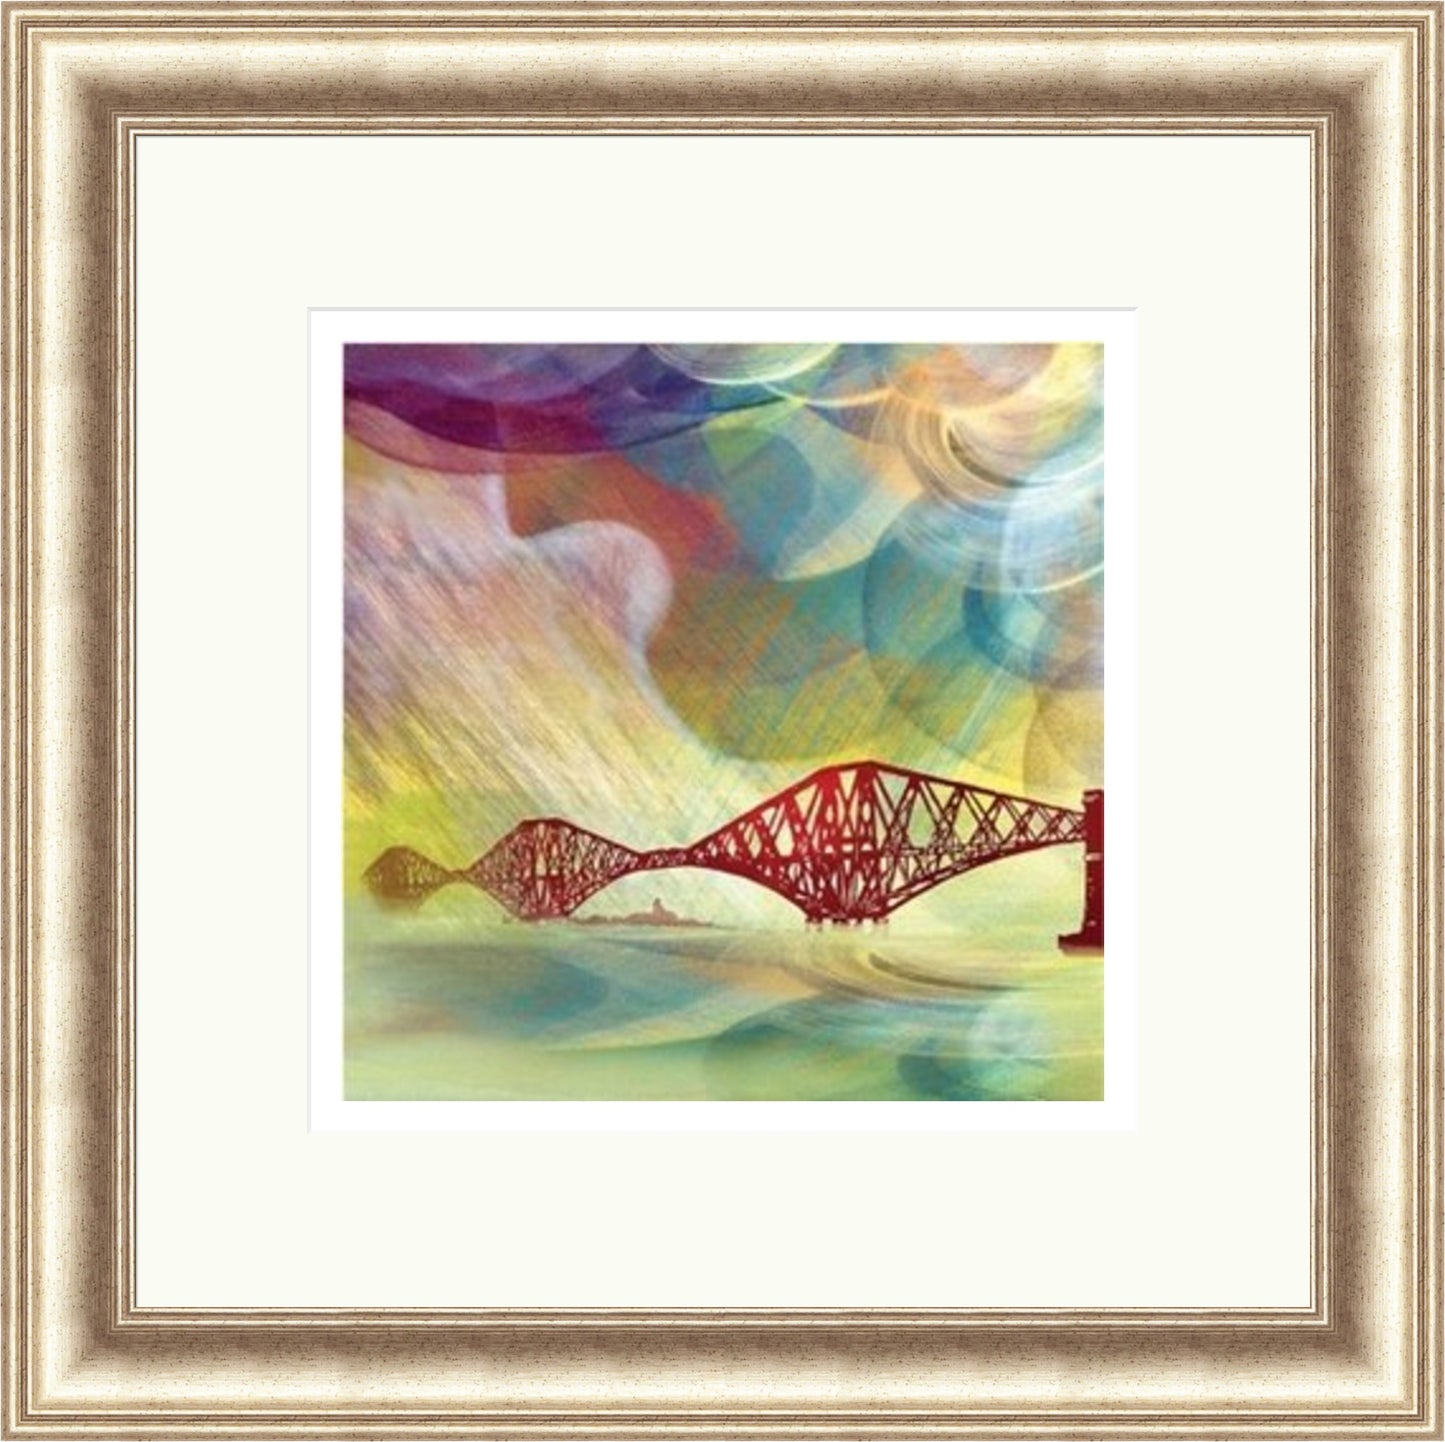 Tartan Skies Over Forth Rail Bridge by Esther Cohen